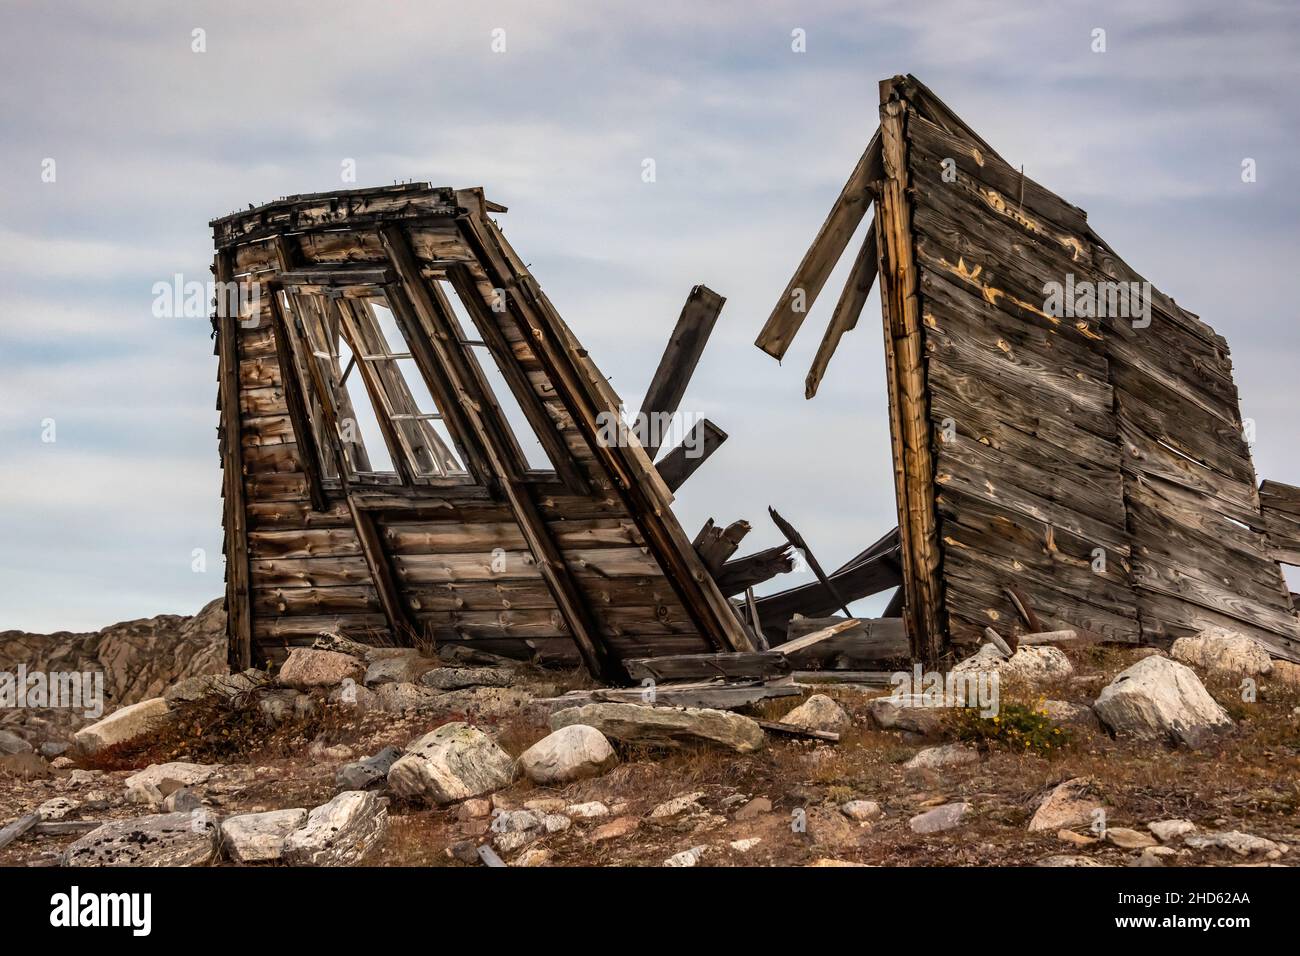 All that's left of an old hunting and whaling cabin, Danmark O, Scoresby Sund, East Greenland Stock Photo